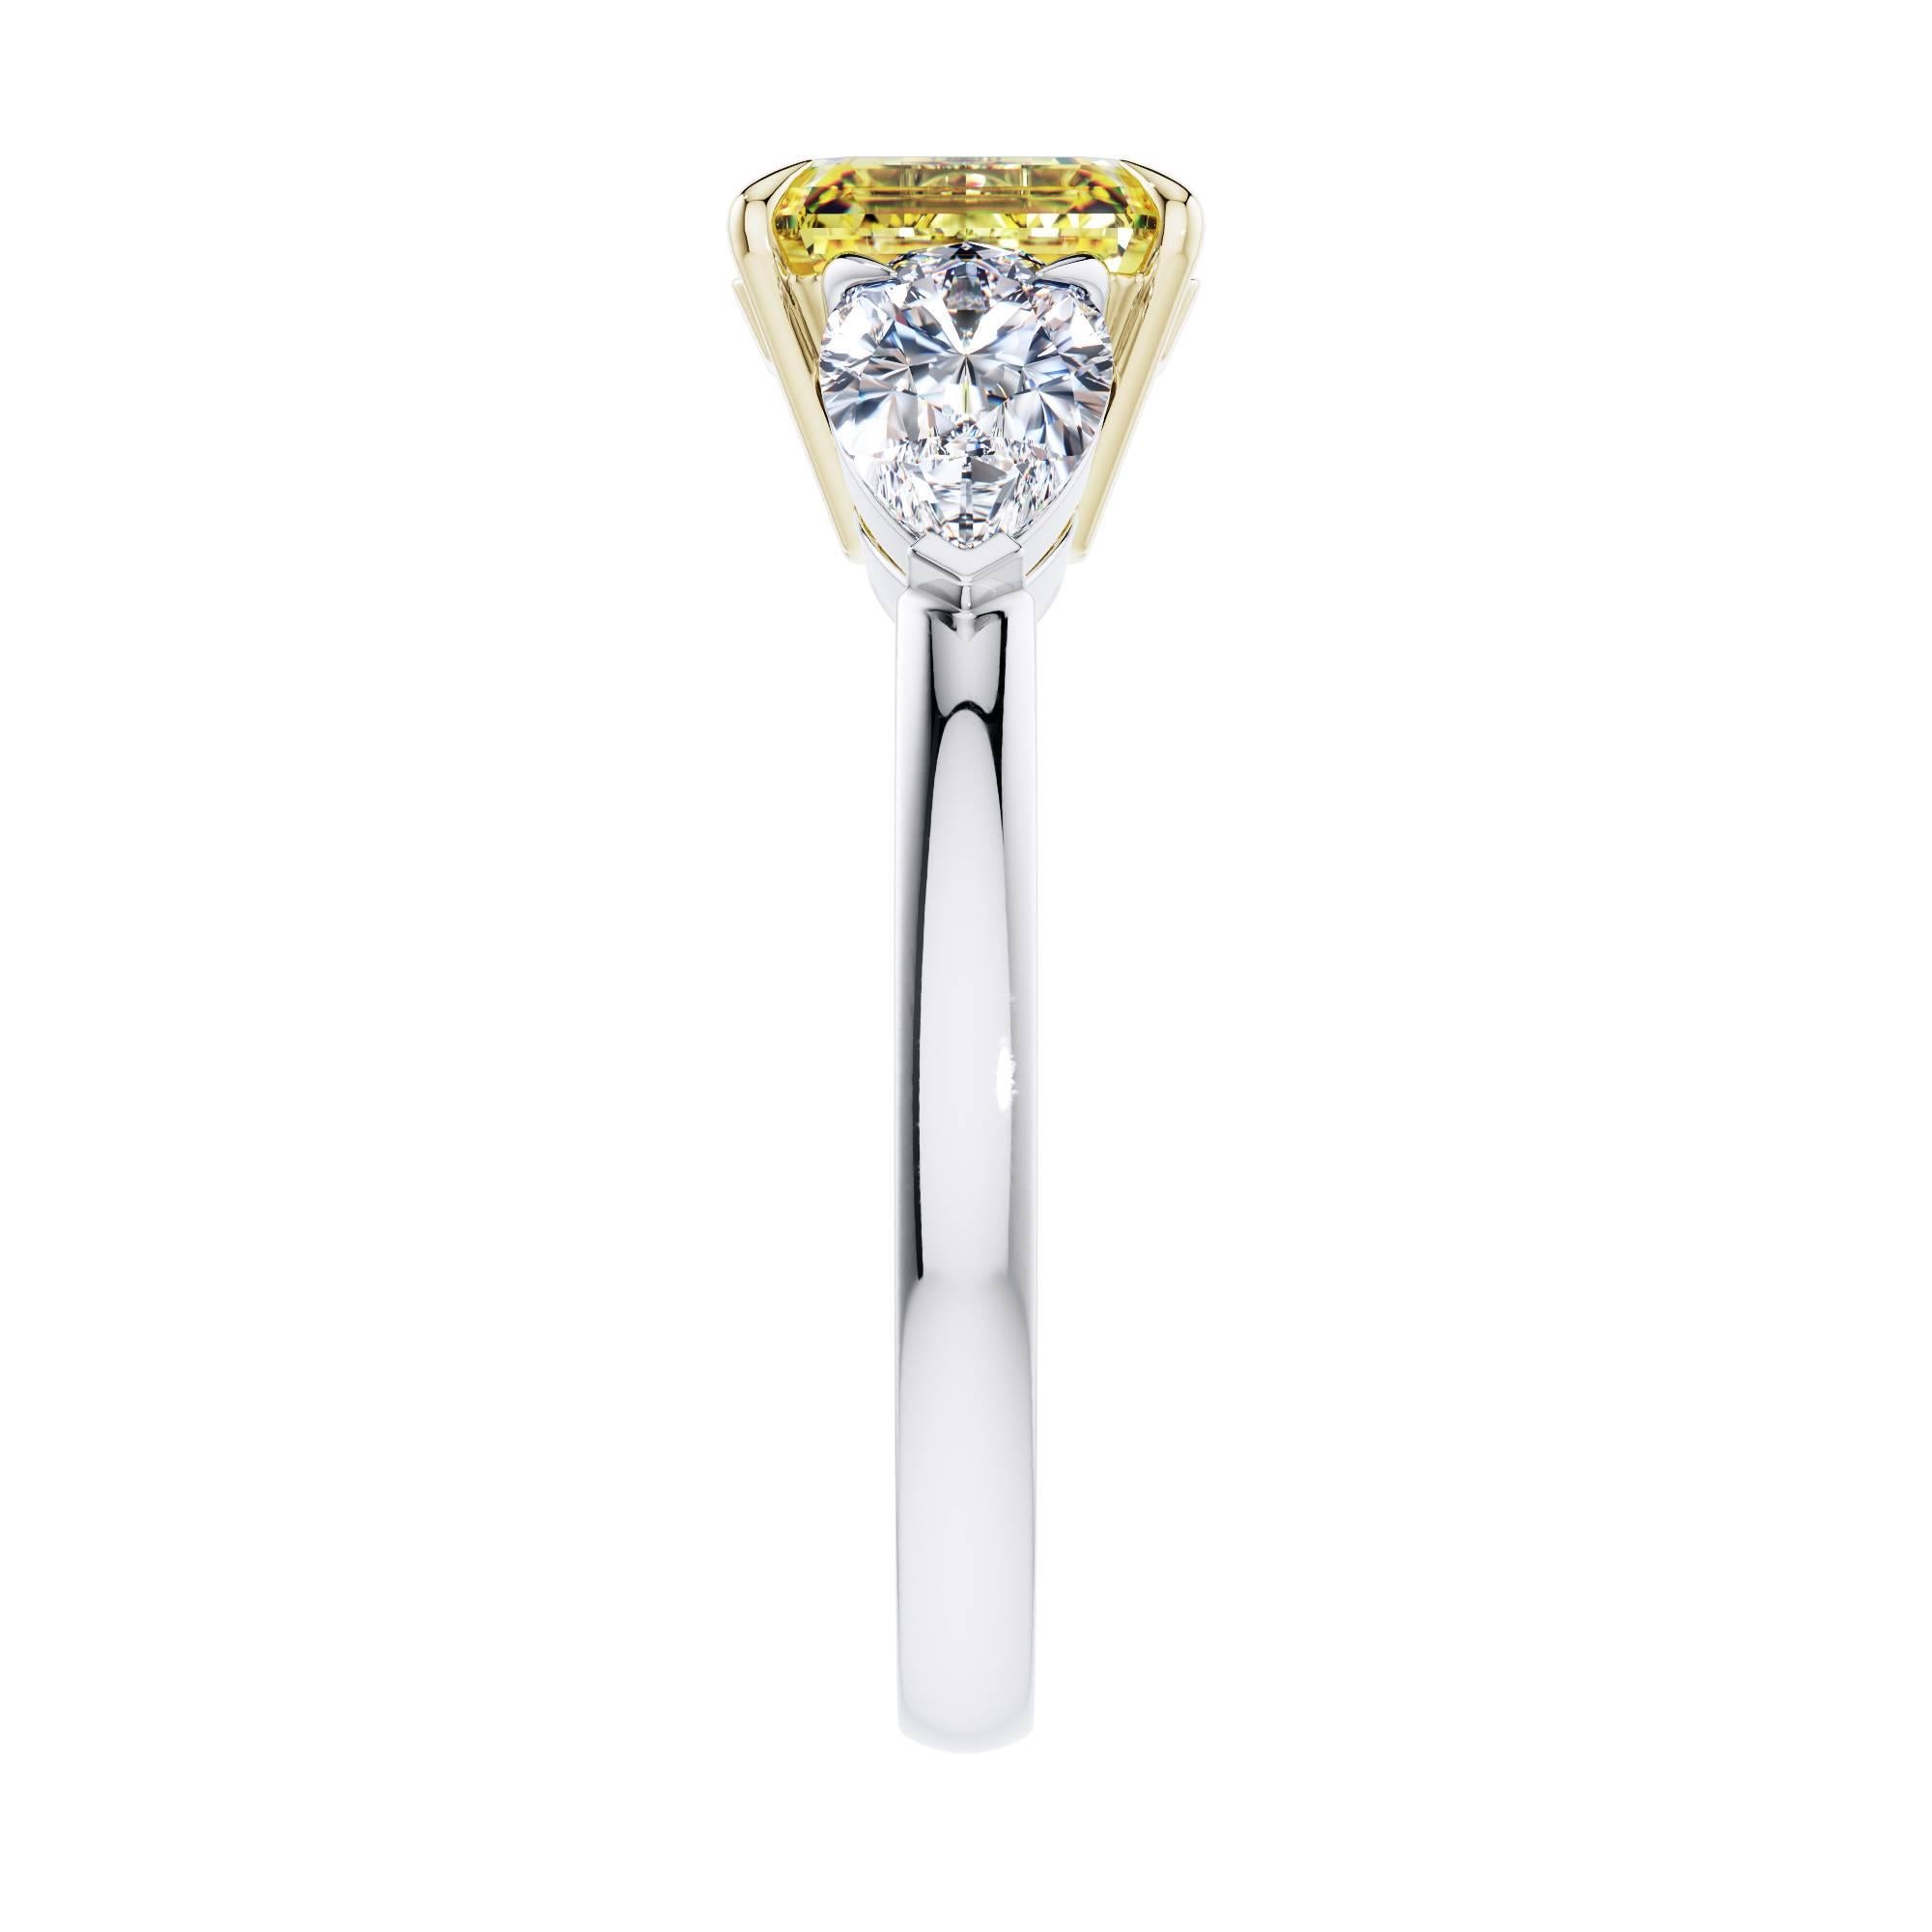  2.19 Carat GIA Fancy Vivid Yellow 1.02ct White Diamond Engagement Ring Platinum In New Condition For Sale In London, GB